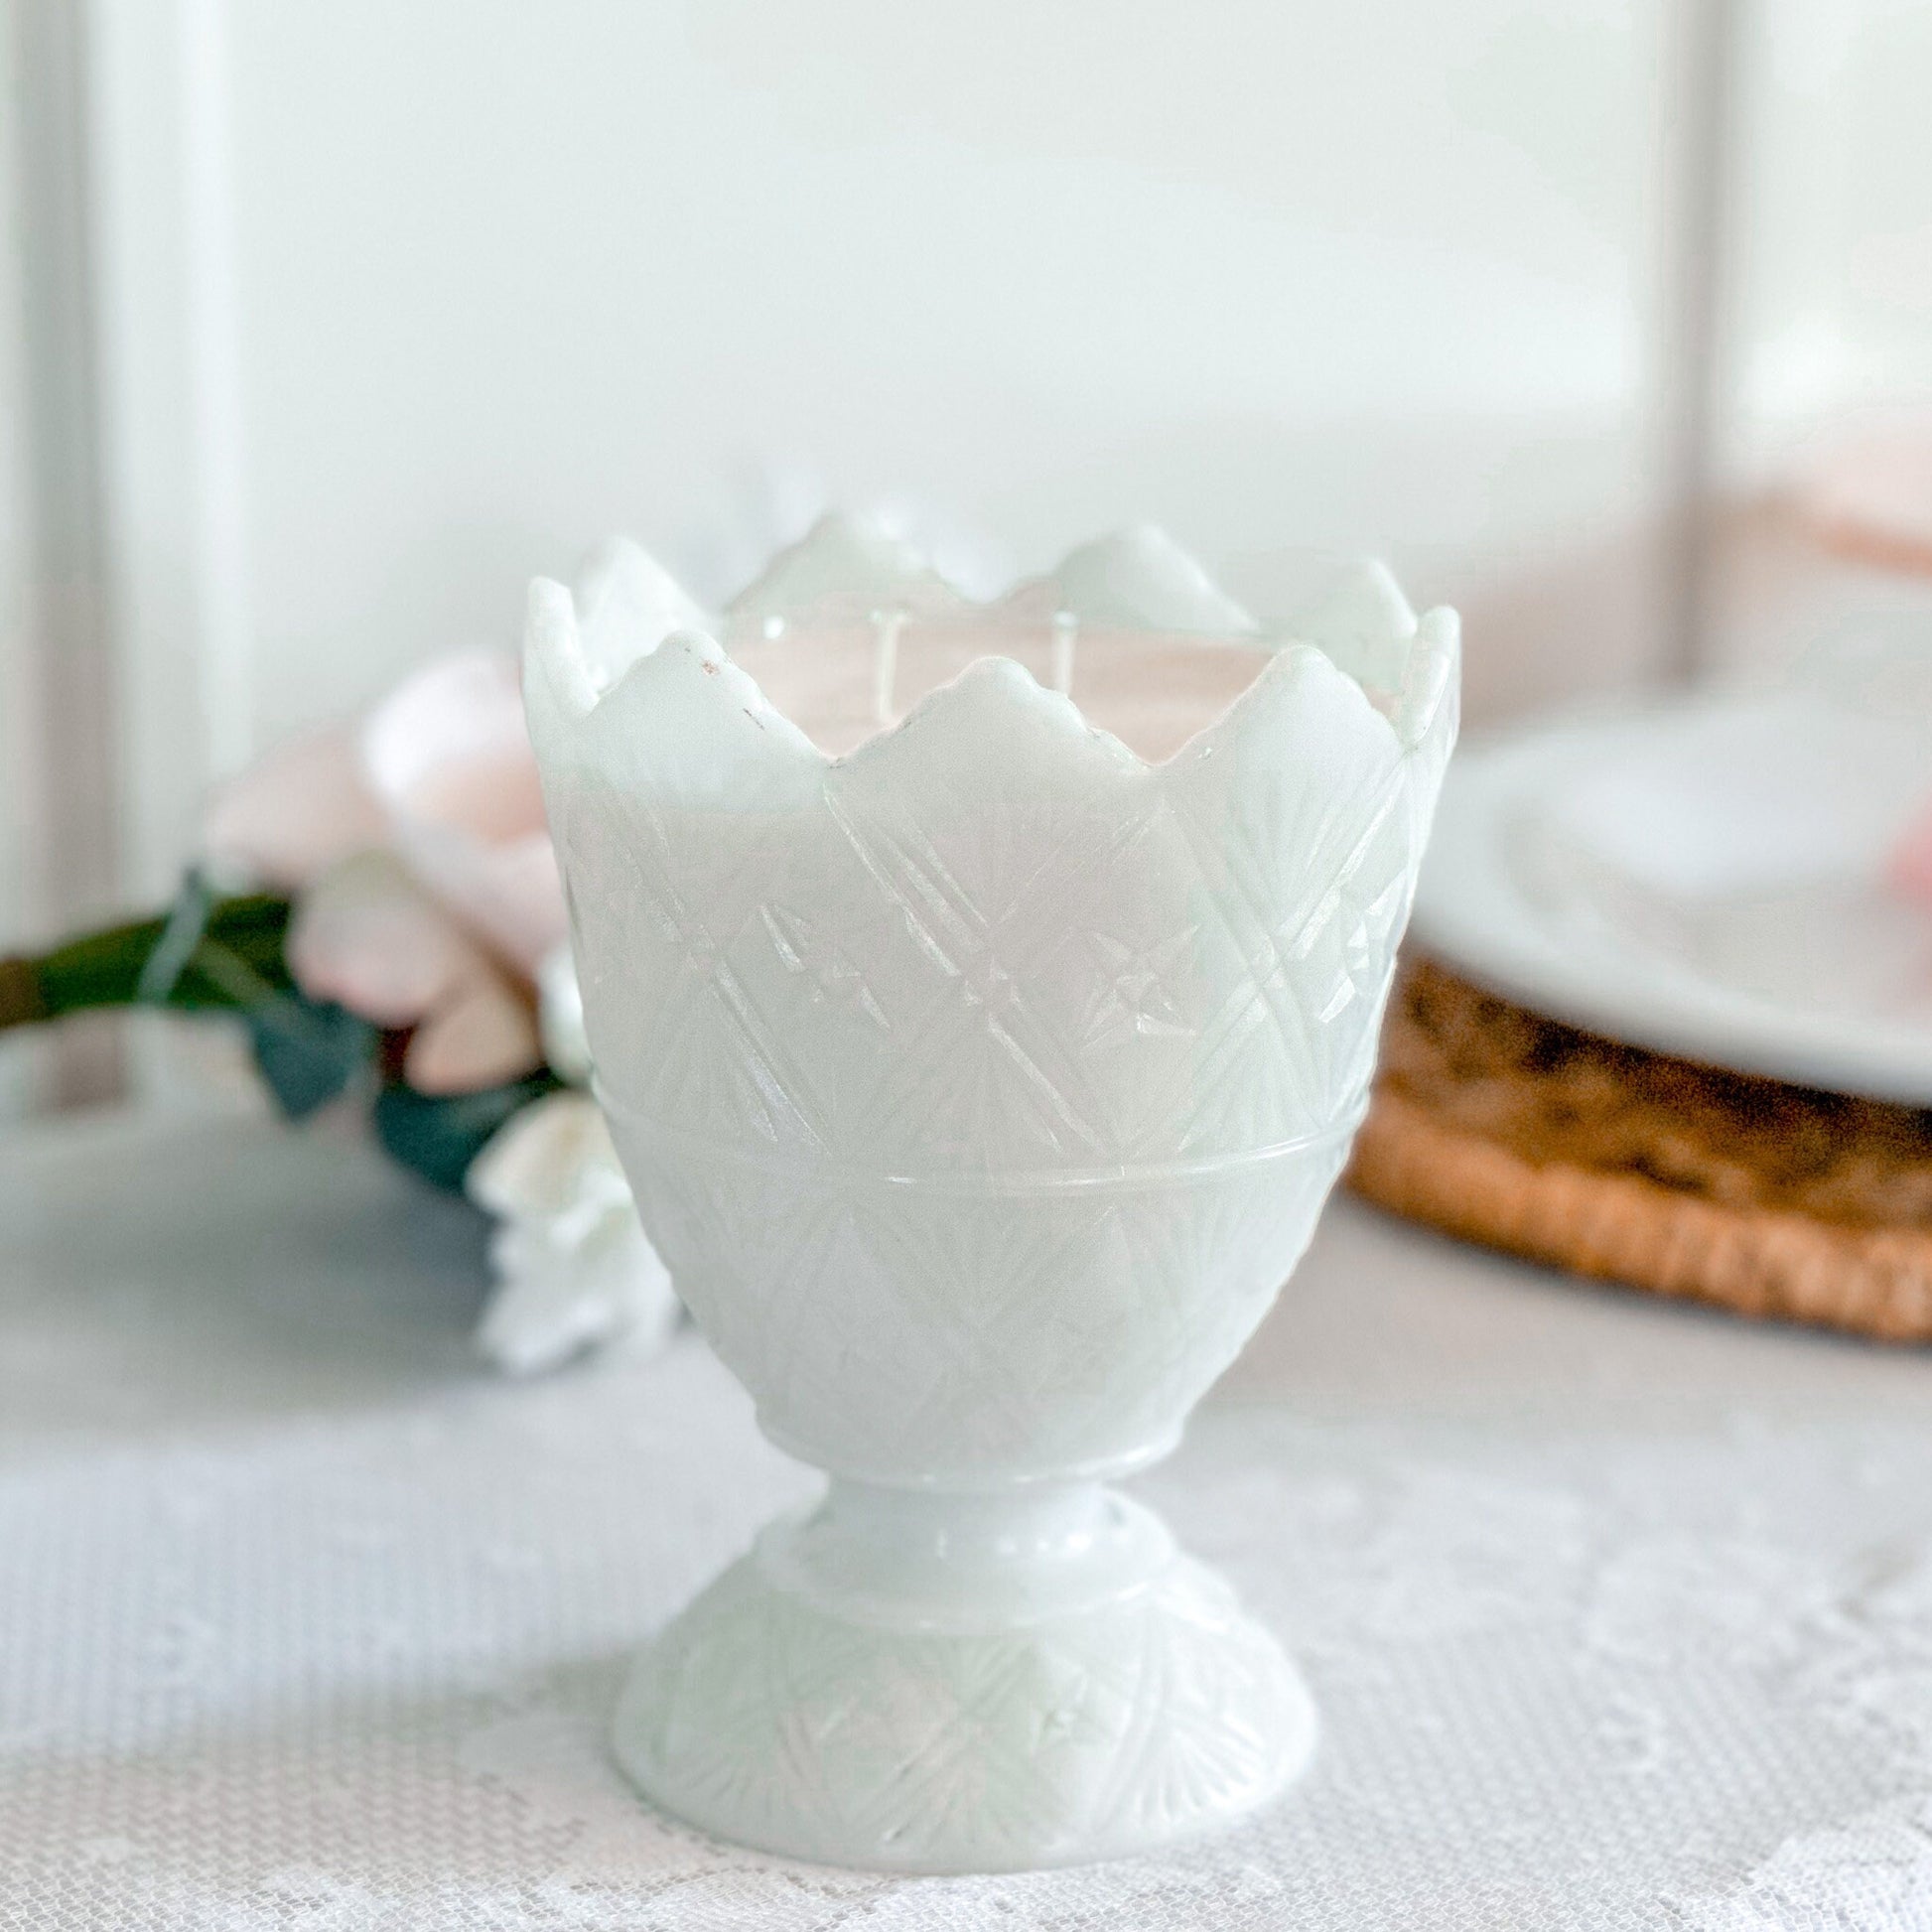 E.O. Brody Vintage Milk Glass Planter Candle with Custom Scents